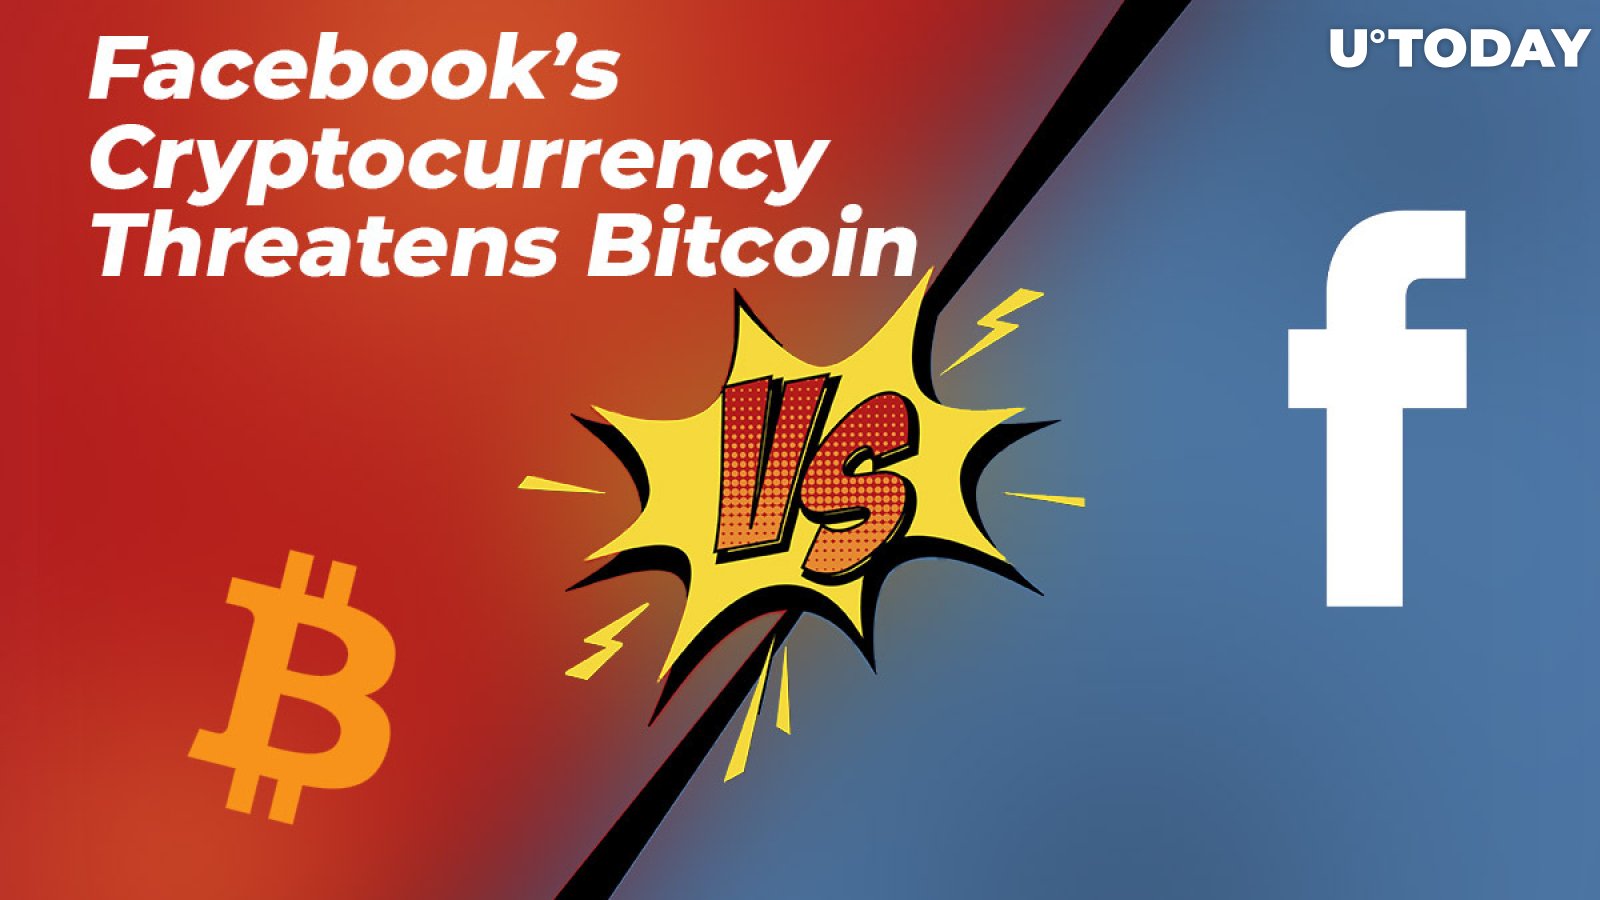 Peter Schiff Claims Facebook’s Cryptocurrency Threatens Bitcoin, Anthony Pompliano Explains Why It’s False